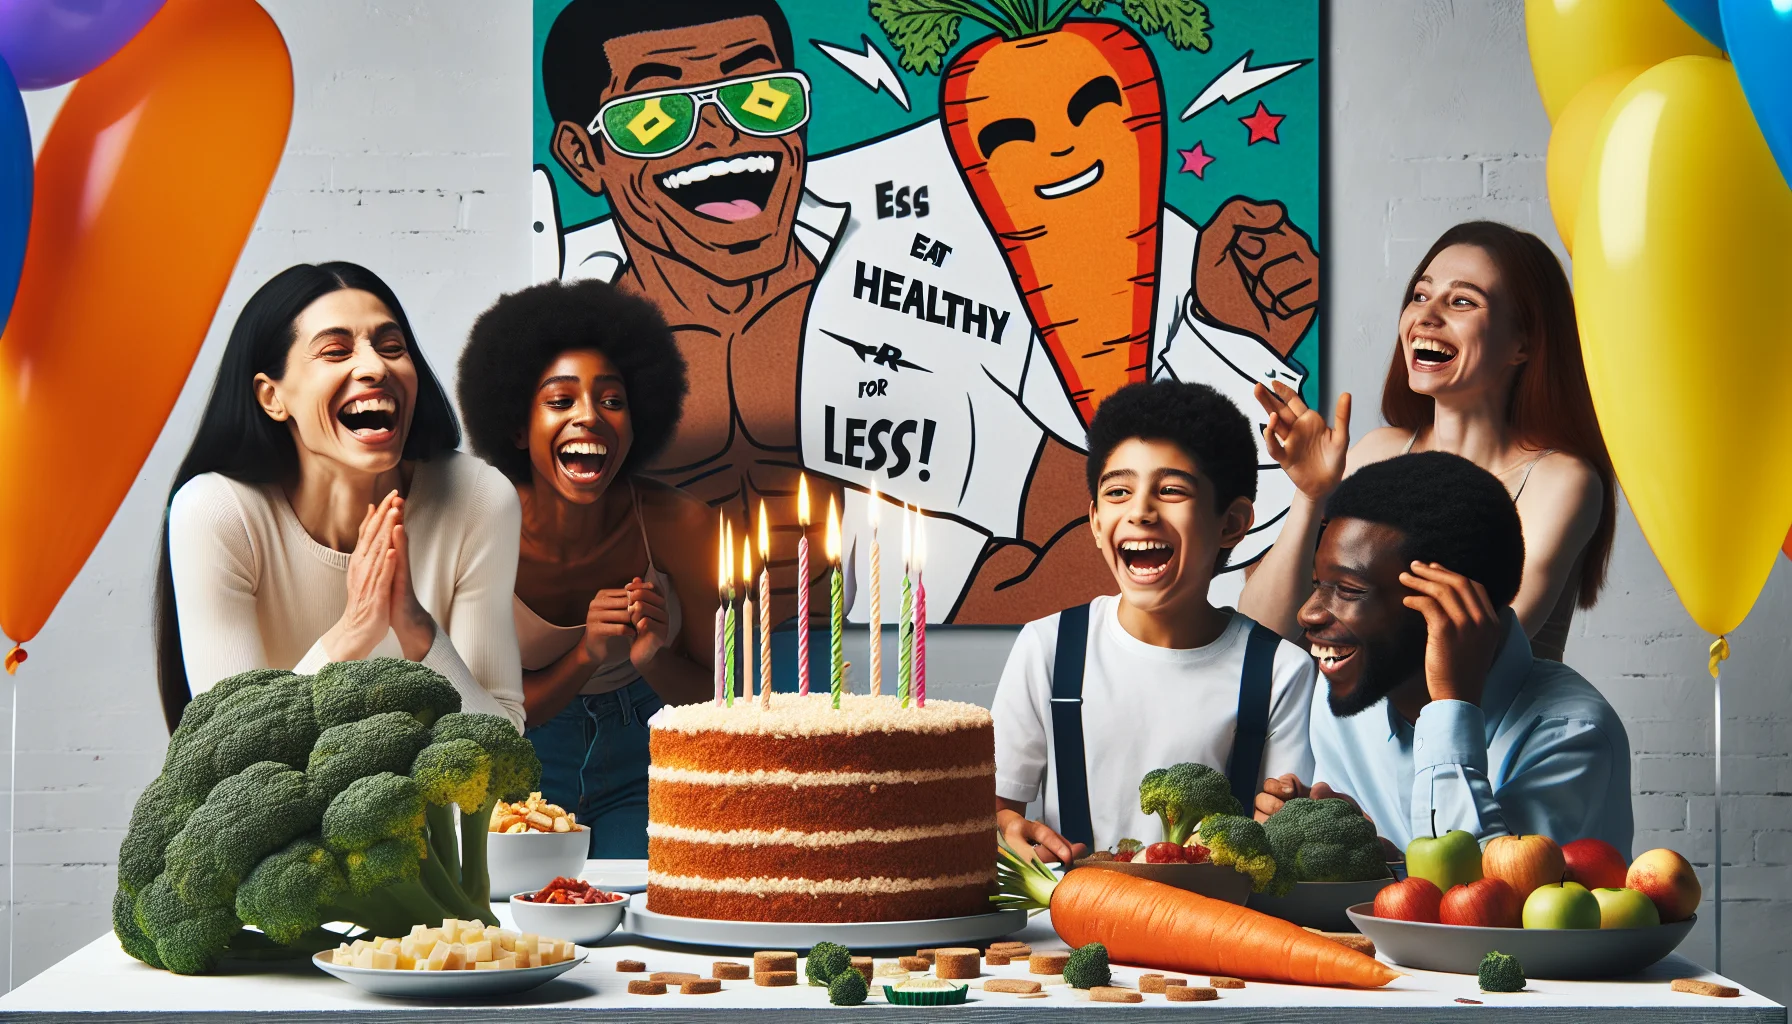 Create an image that embodies a lighthearted birthday celebration. In the scene, a group of various individuals, including a black woman, a South Asian man, a Middle Eastern boy, and a Hispanic girl, laugh and mingle around a table full of healthy and affordable food options. Yin the foreground, there's an oversized carrot cake with mischievously glowing candles, and in the background, a poster reads 'Eat healthy for less!'. Add comic elements like a broccoli wearing sunglasses and a dancing apple to make the environment funny and vibrant.